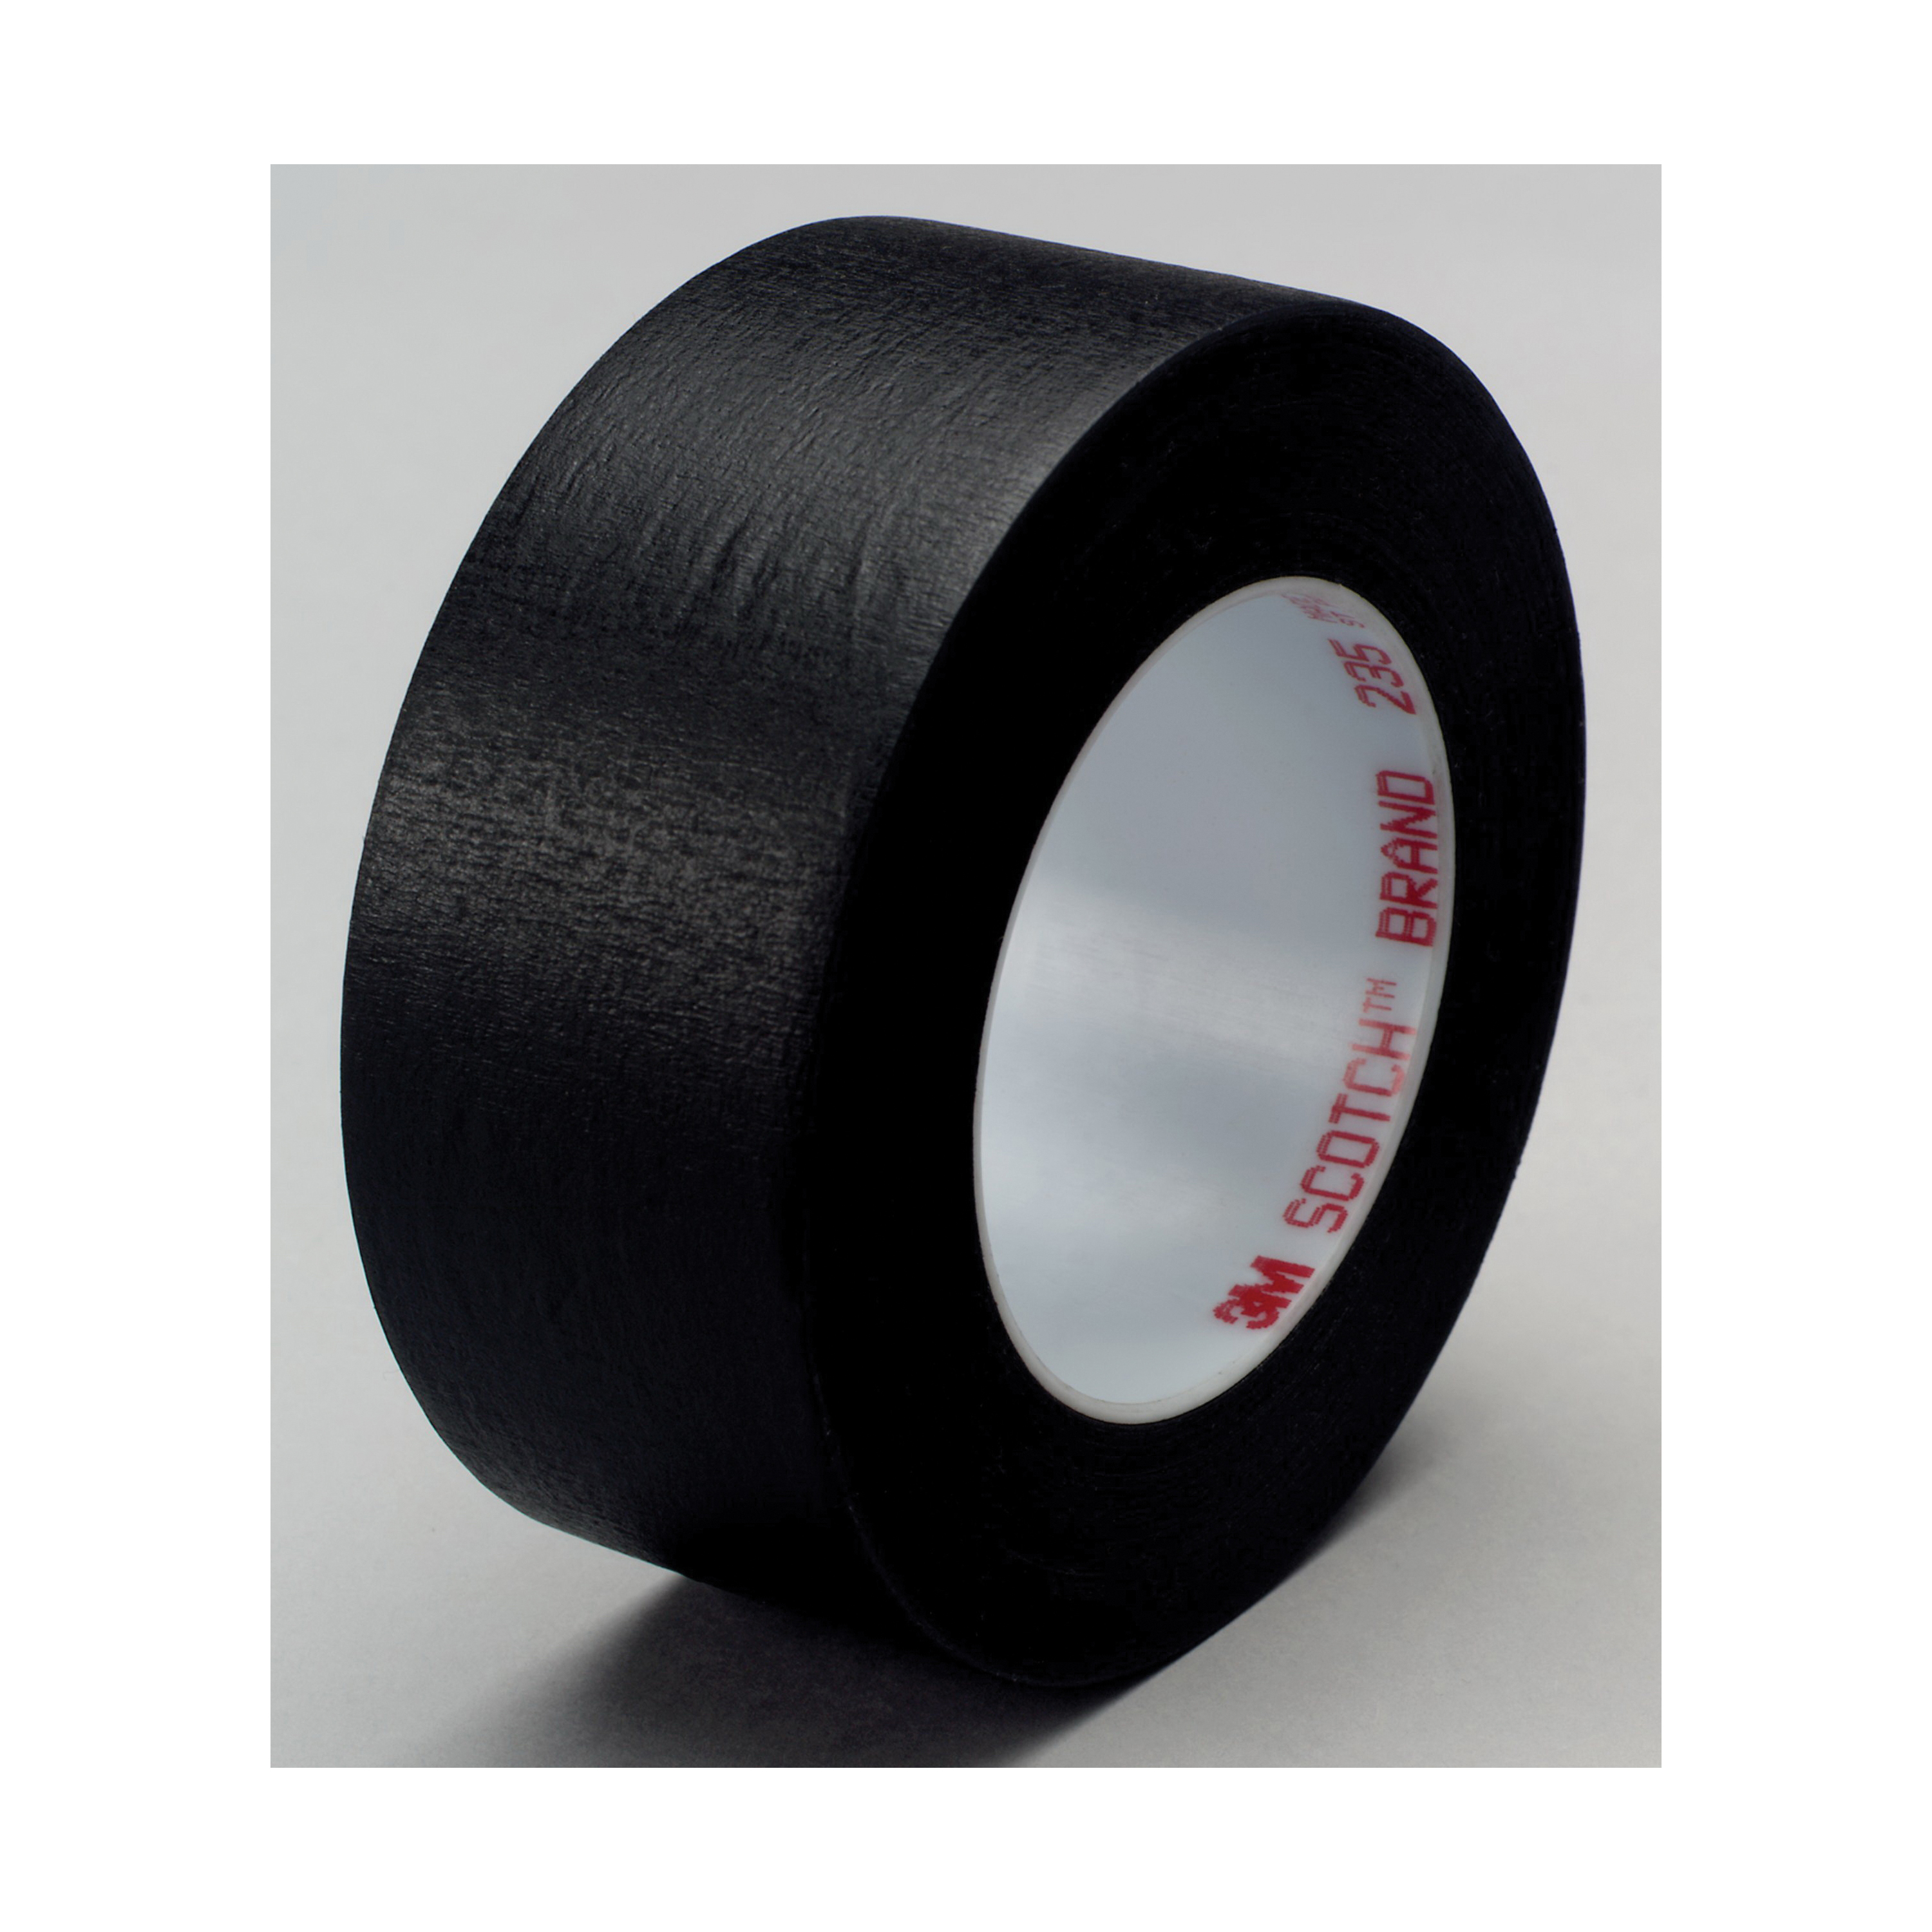 3M 235 Photographic Black Photographic Masking Tape, 1 in Width x 60 yd  Length